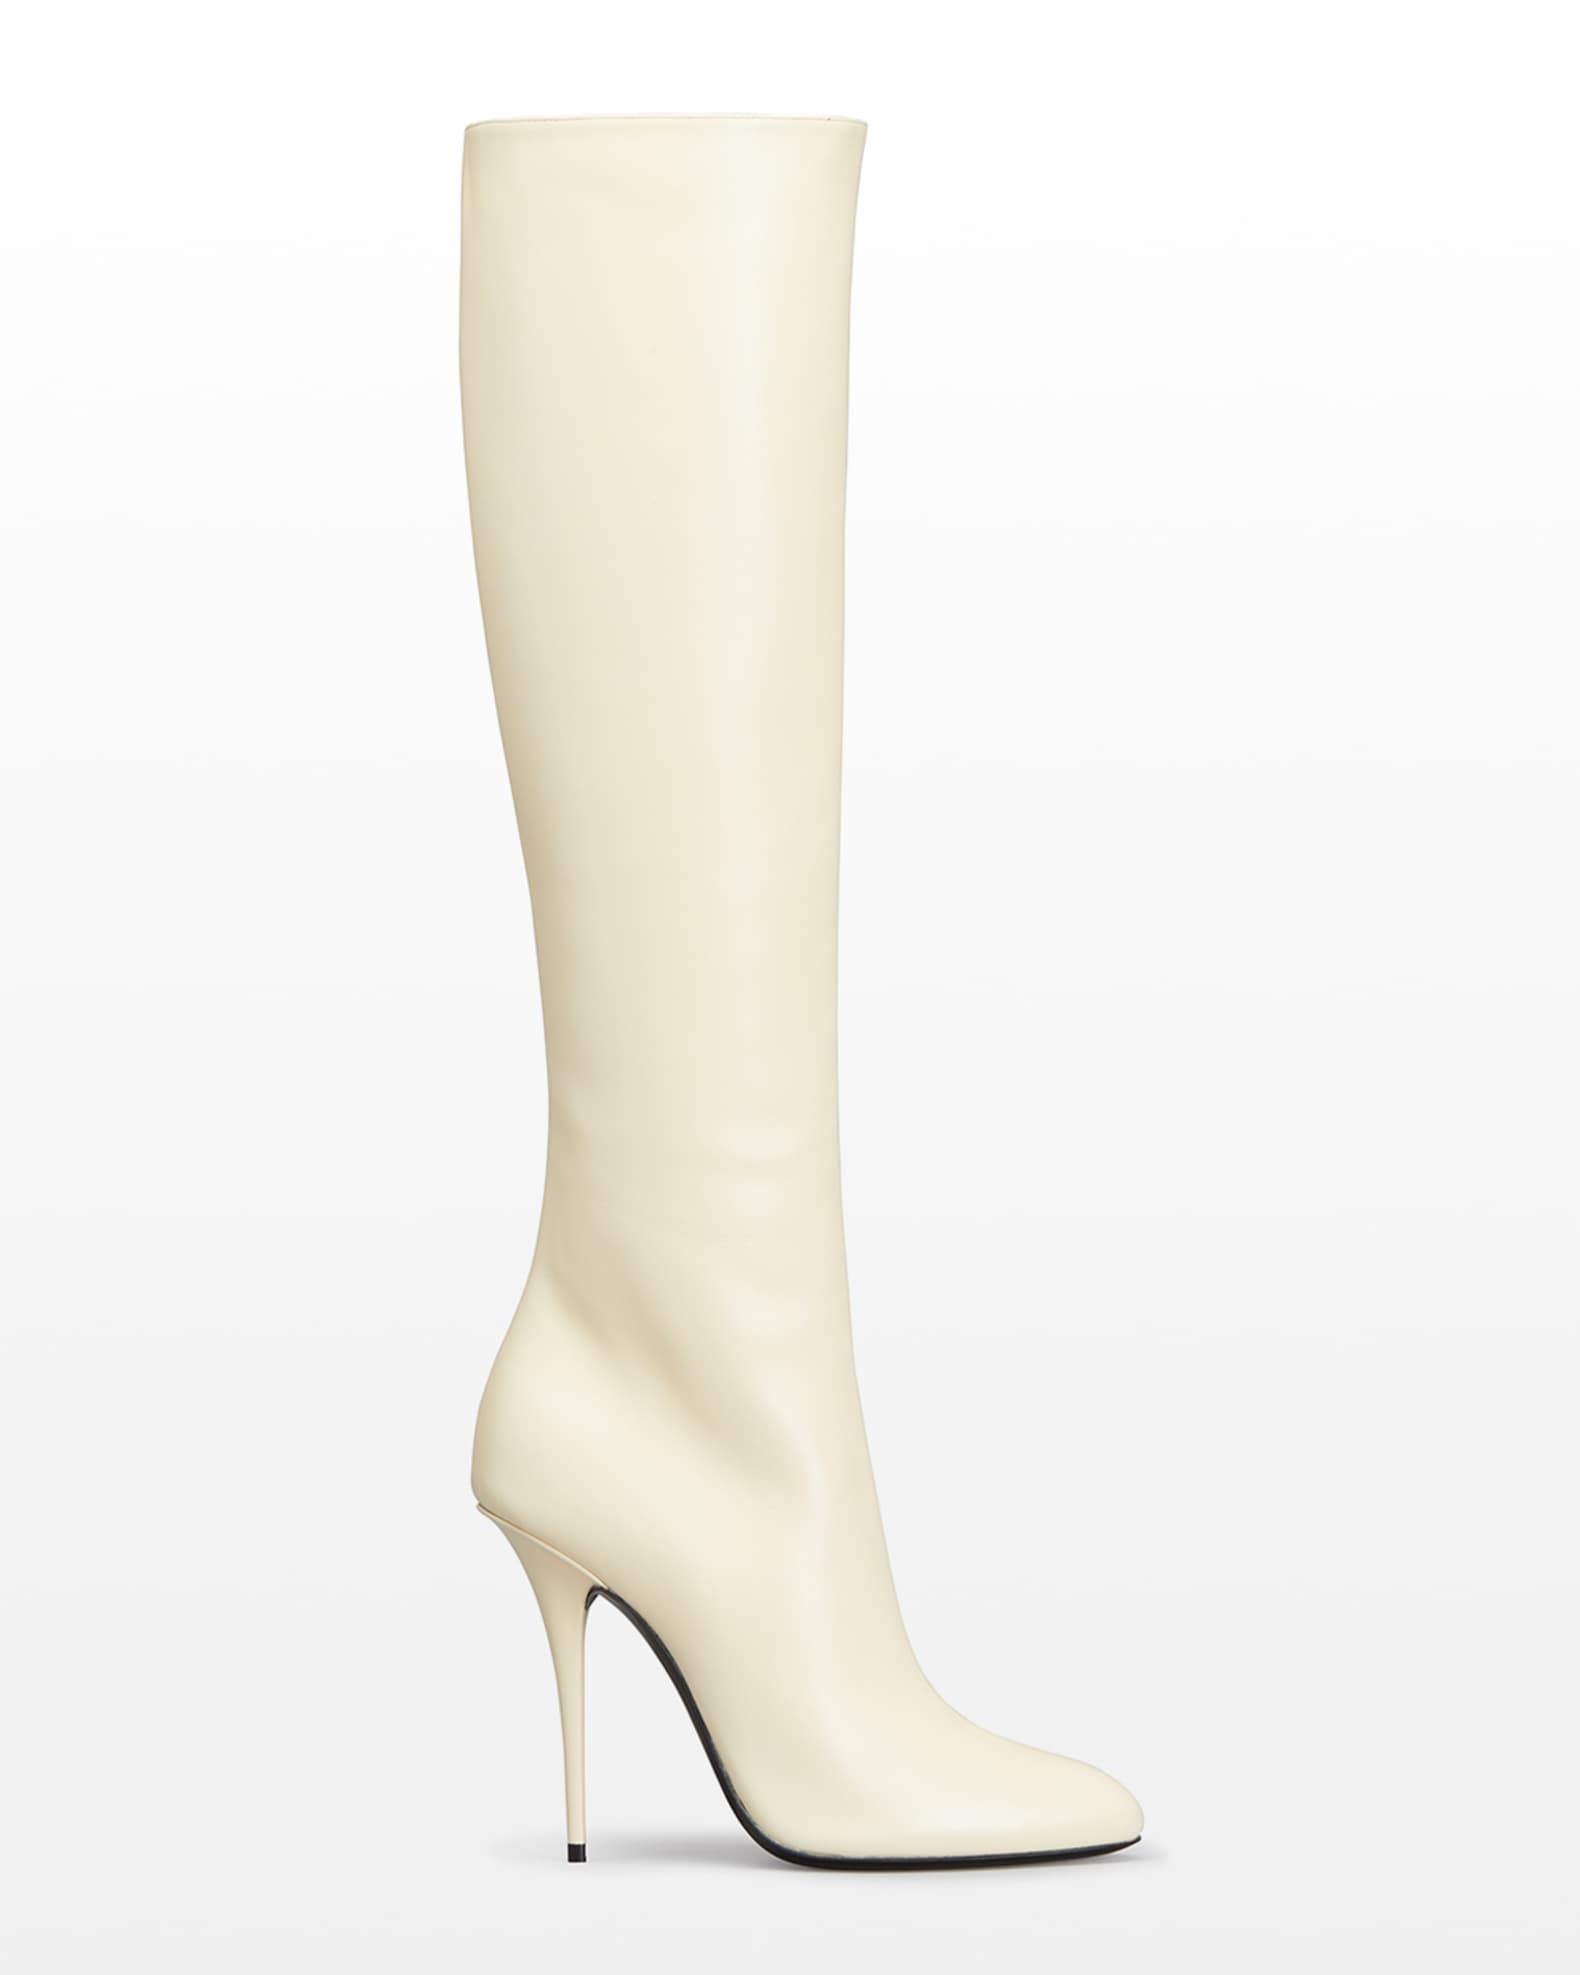 Off white knee high boots